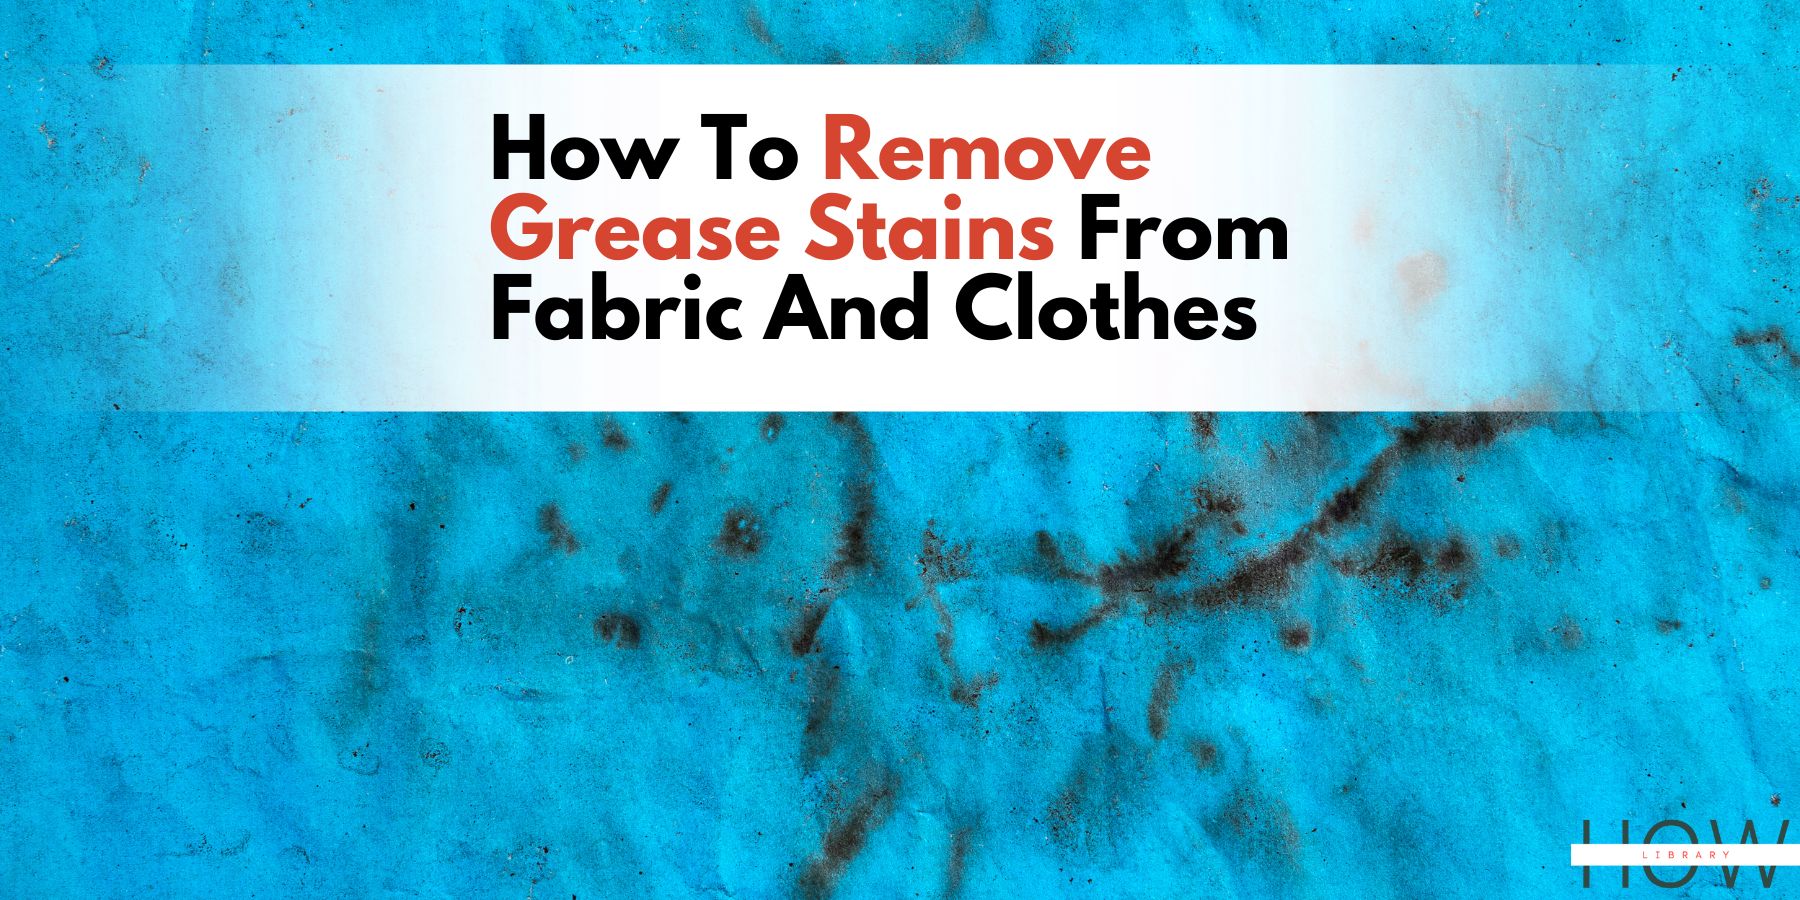 How To Remove Grease Stains From Fabric And Clothes Using Tried And Tested Methods